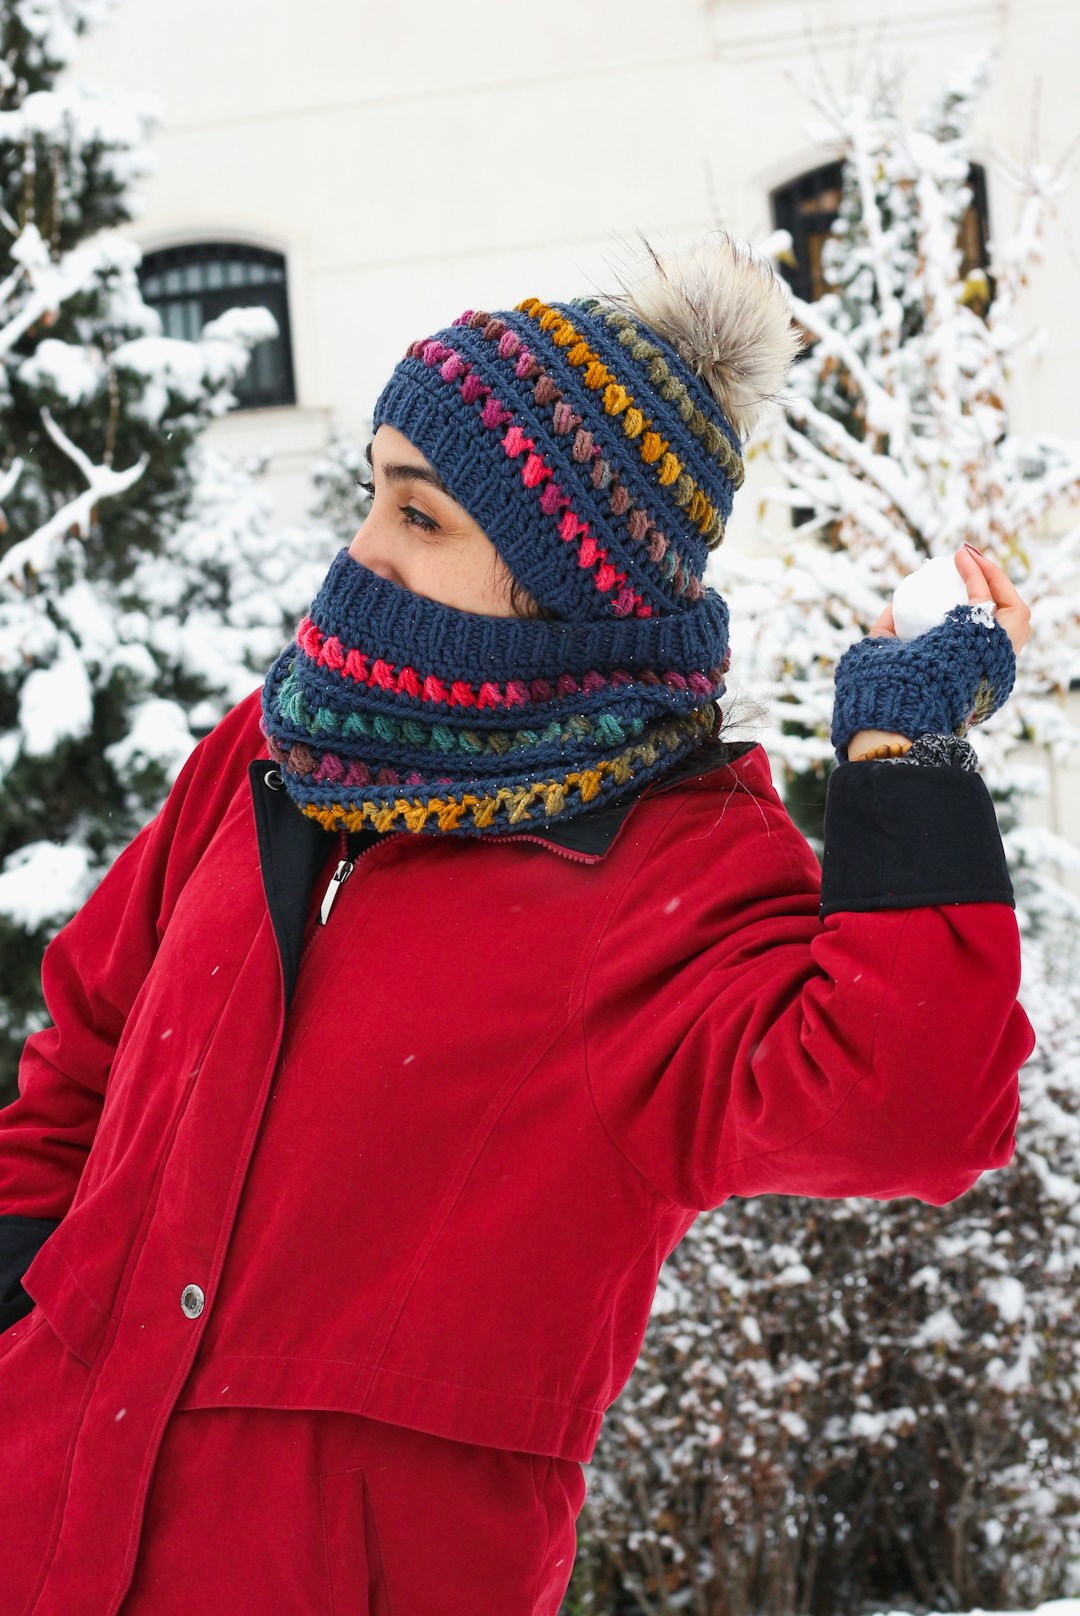 woman in red jacket and knit cap standing on snow covered ground during daytime